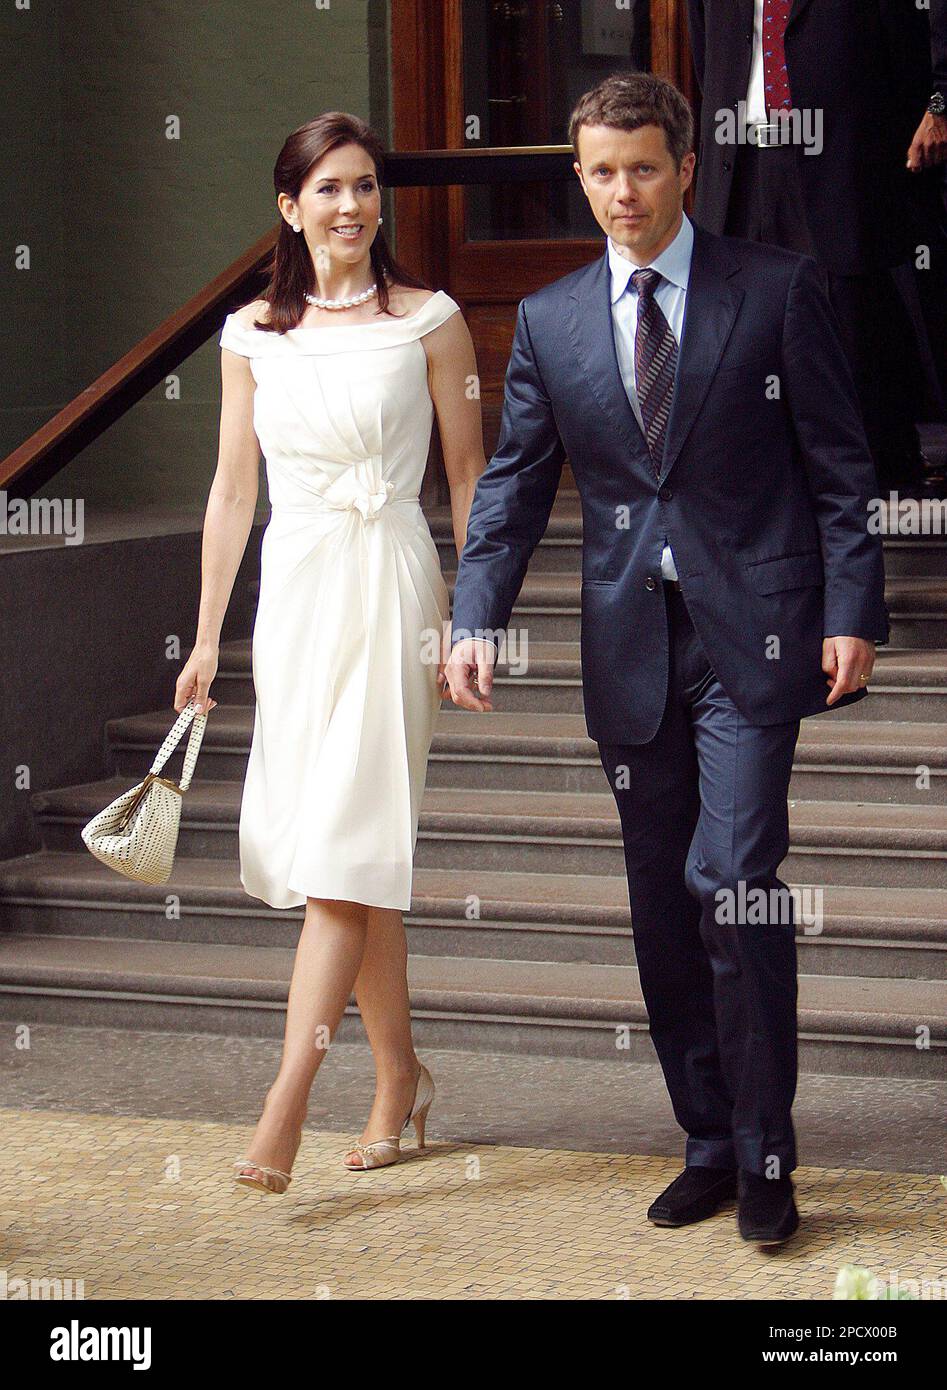 Denmark's Australian-born Crown Princess Mary and Crown Prince Frederik visit the Ny Carlsberg Glyptotek Museum in Copenhagen, Denmark , Tuesday, June 27 2006. The museum was reopened Tuesday after a 3 year renovation. The museum is best known for its impressionist paintings, antique sculptures, an Etruscan collection and Danish art.(AP Photo/John McConnico) Banque D'Images